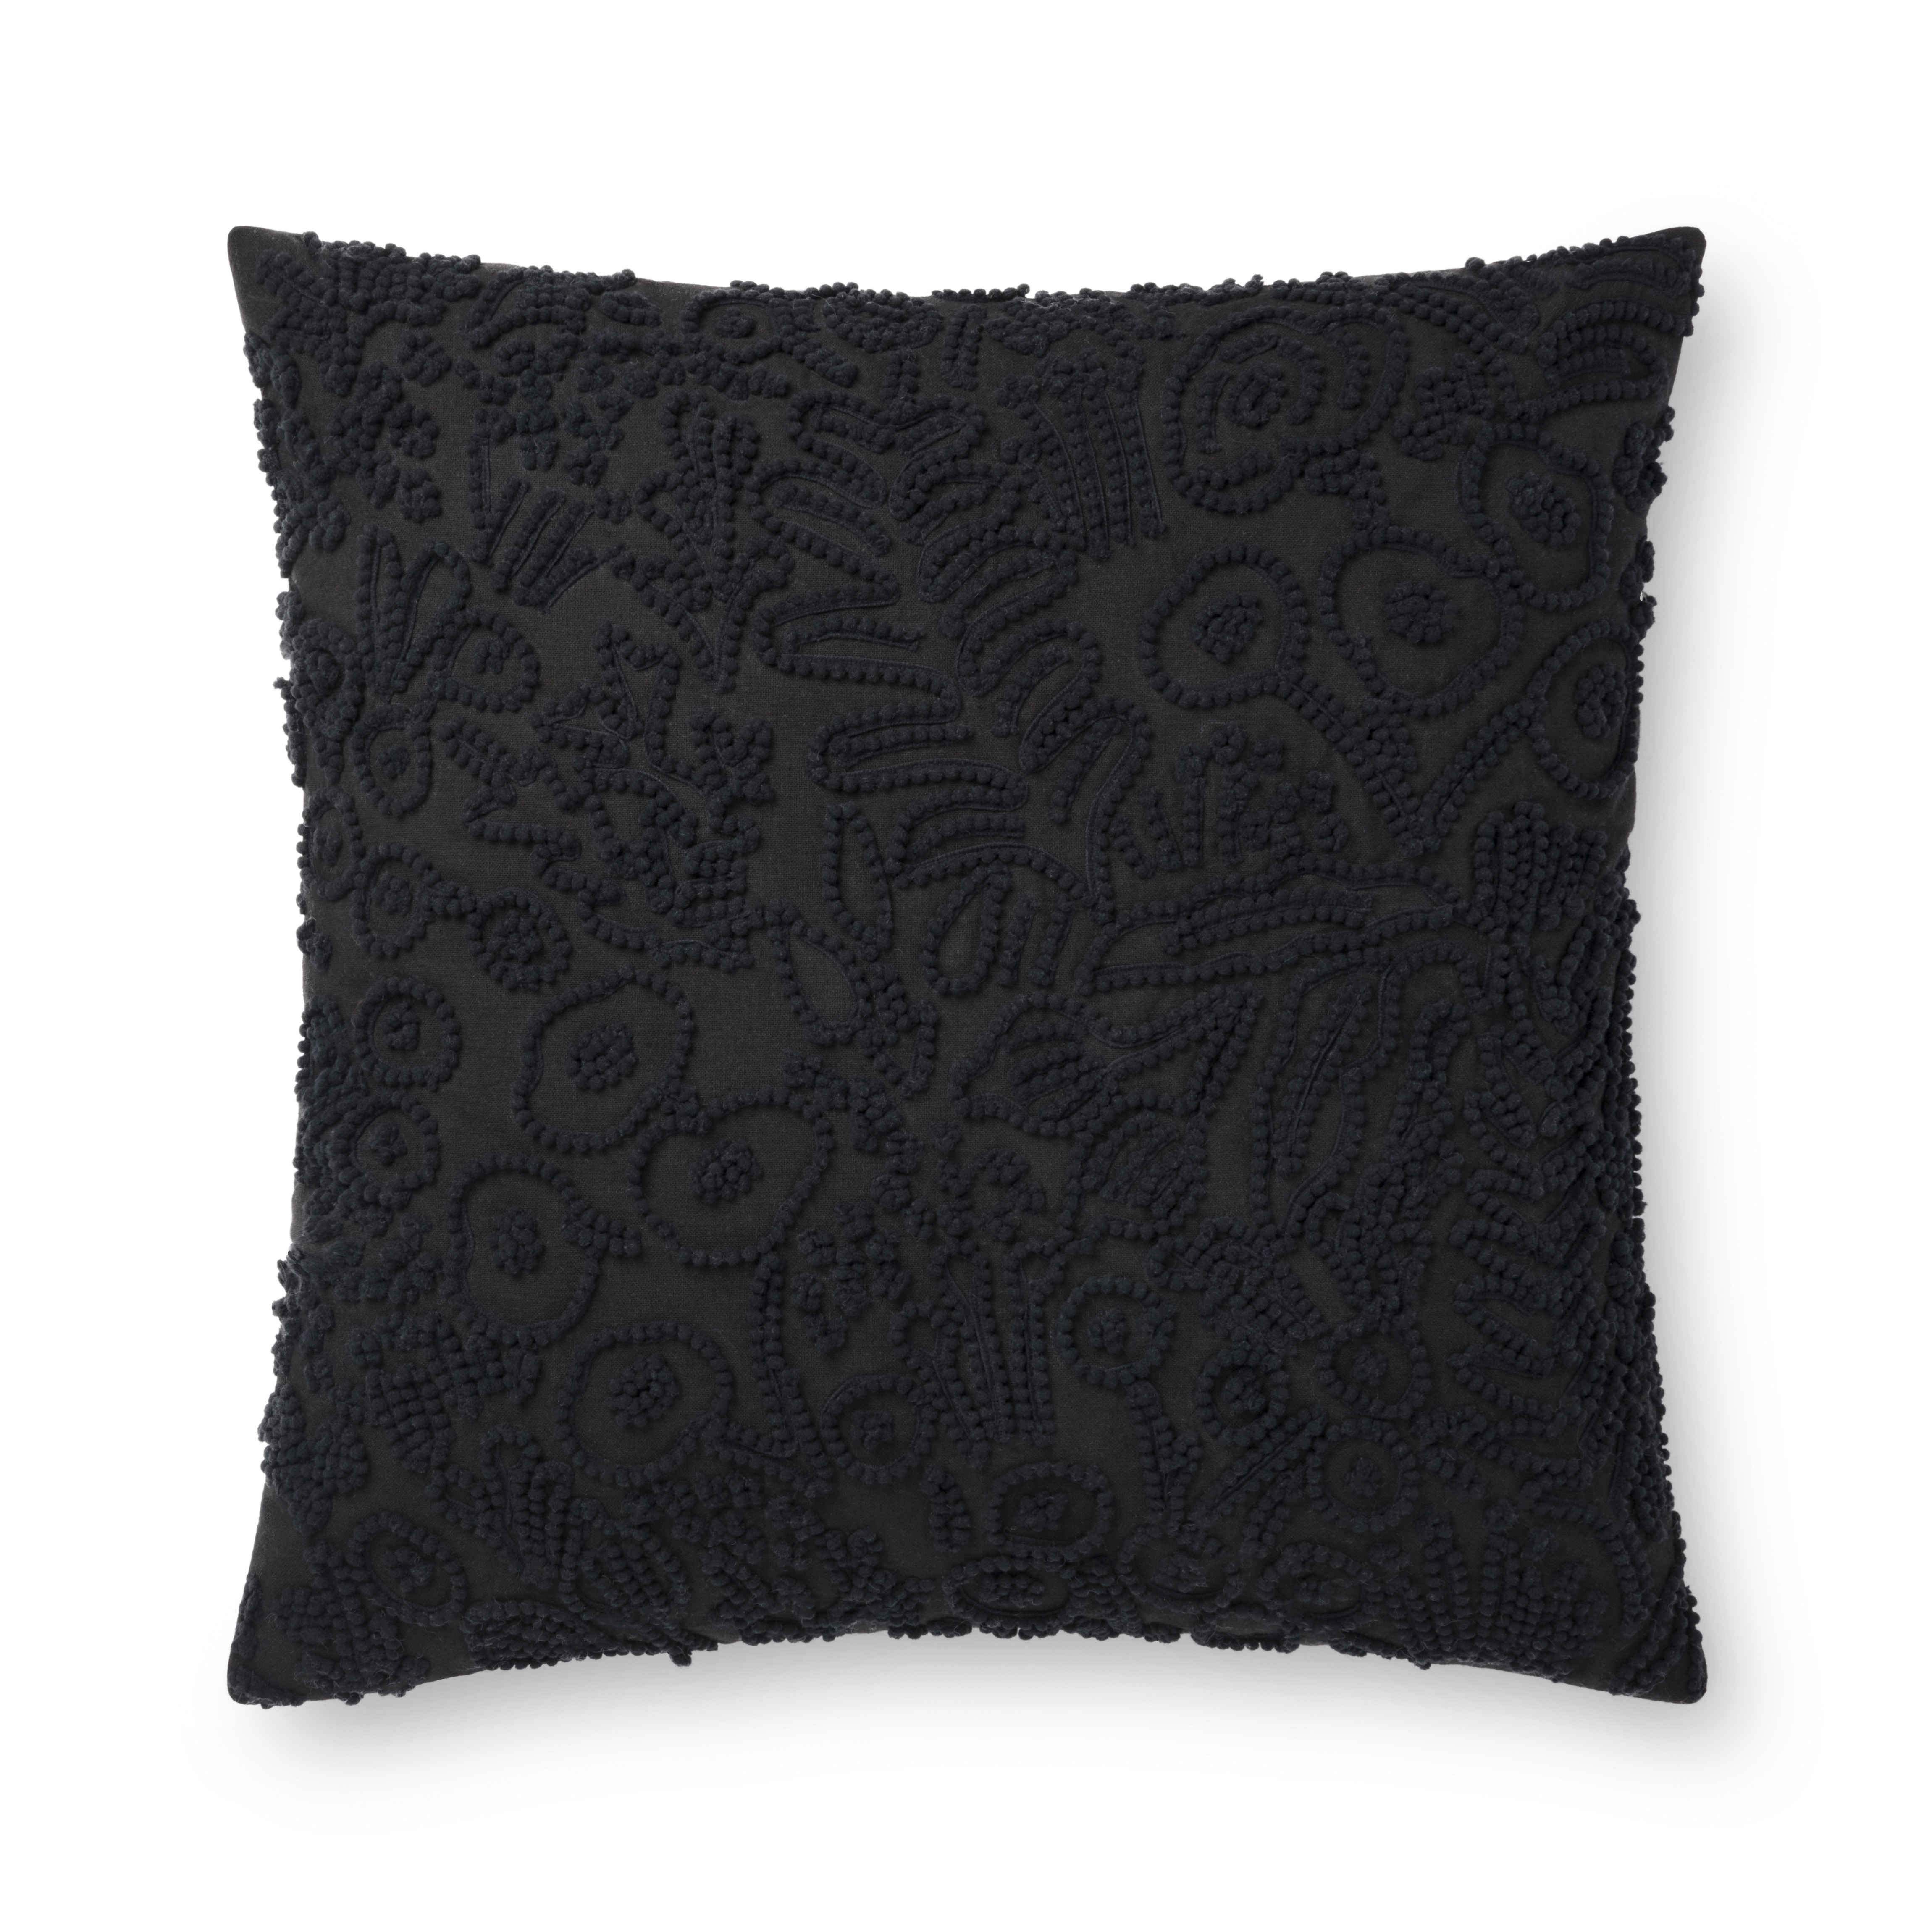 Rifle Paper Co. x Loloi PILLOWS P6030 BLACK 22" x 22" Cover Only - Image 0